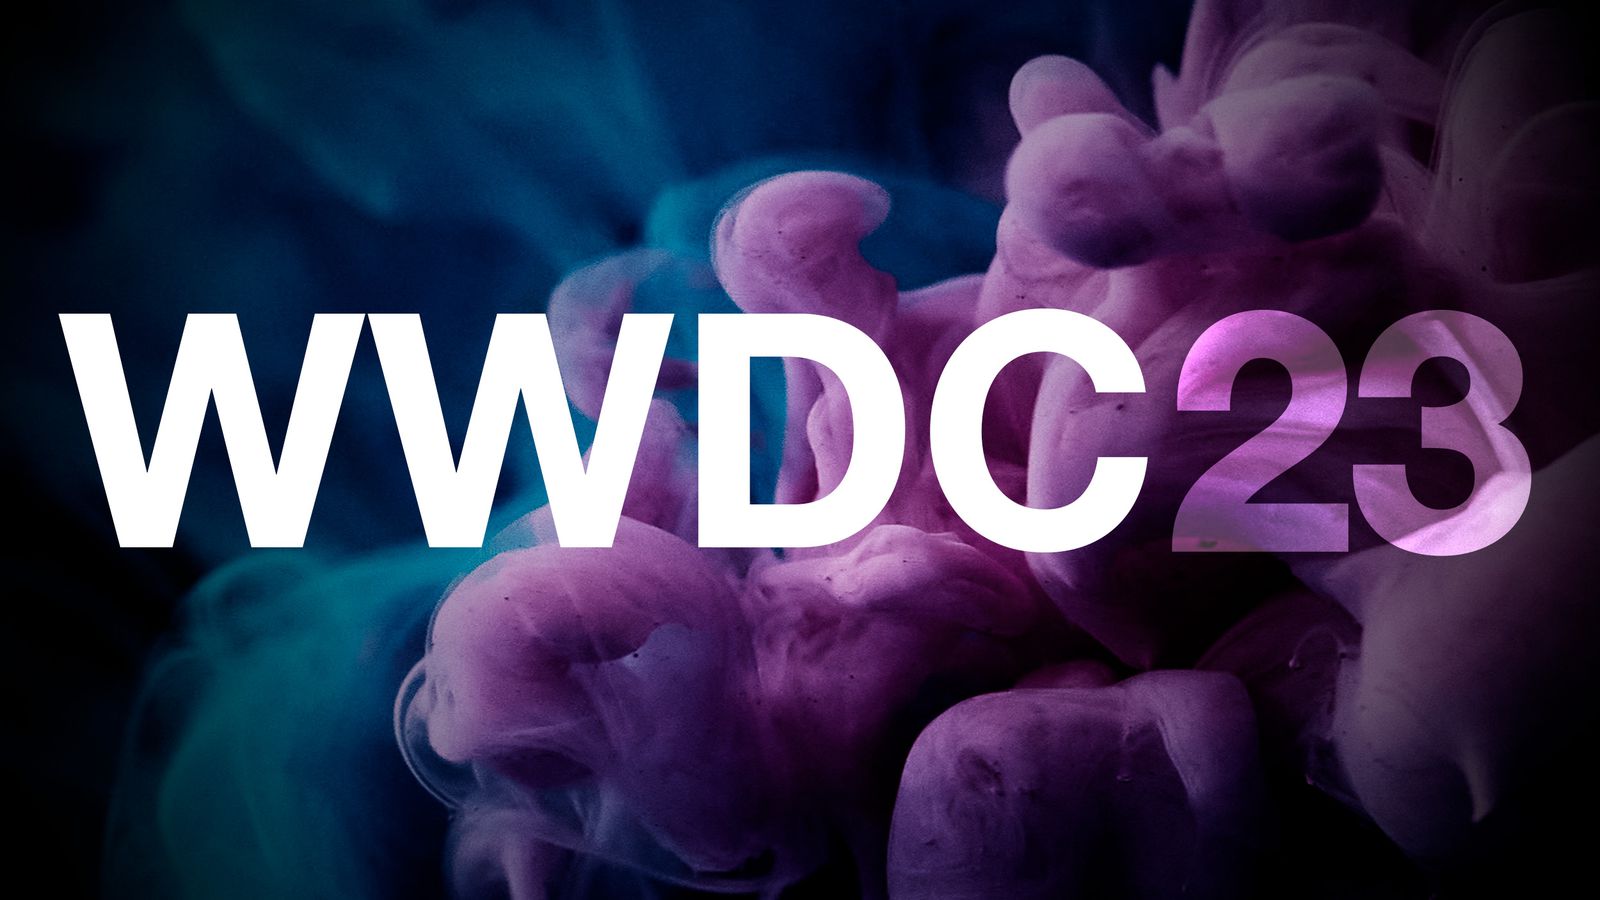 WWDC 2023 Wallpapers Wallpaper Cave